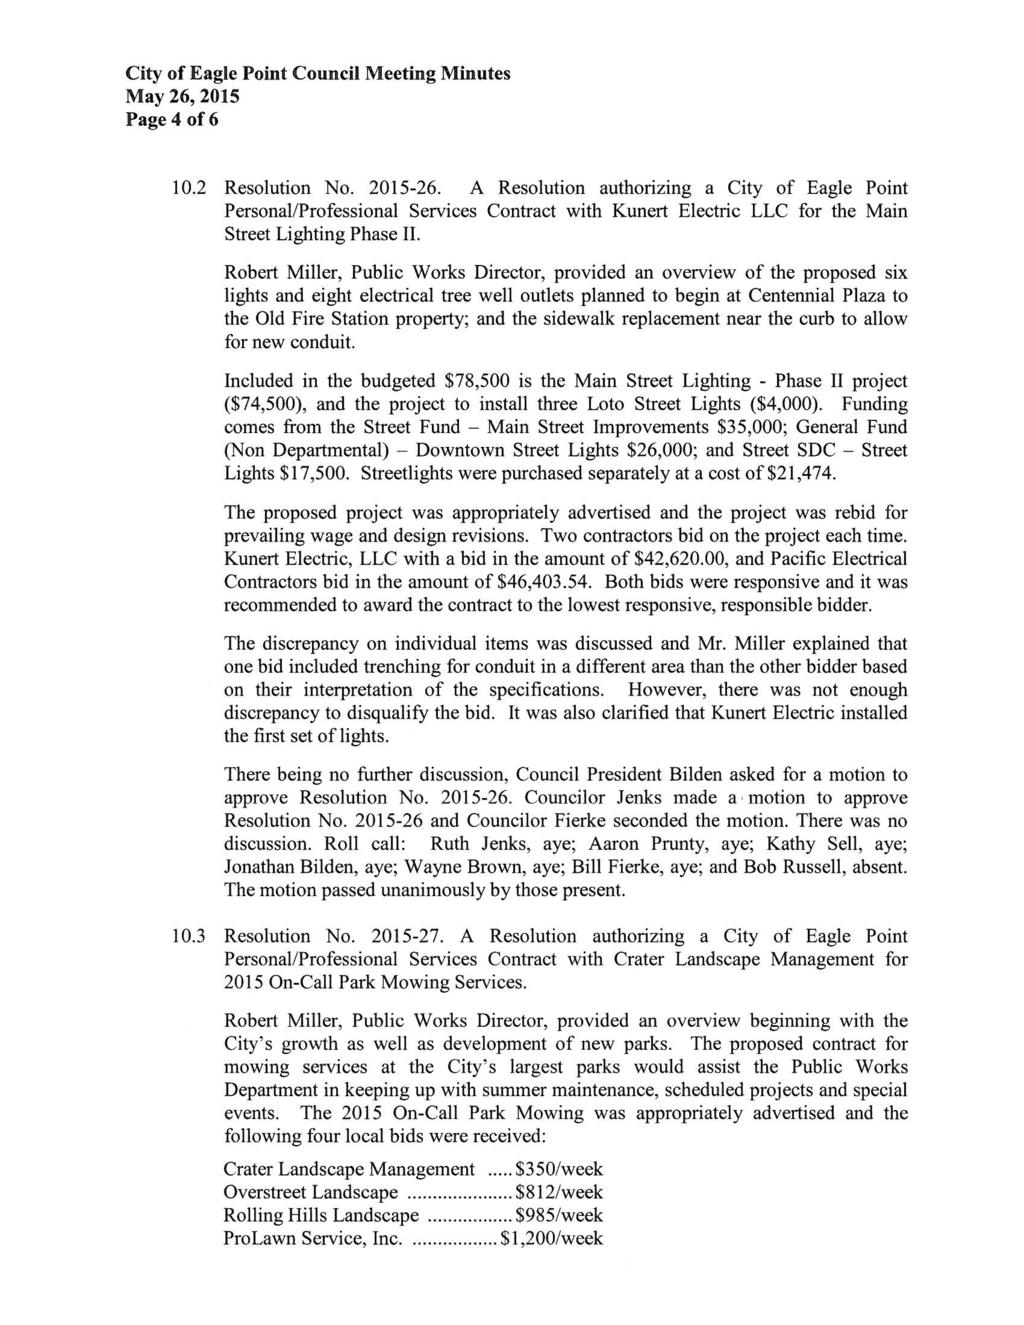 Page 4 of 6 10. 2 Resolution No. 2015-26. A Resolution authorizing a City of Eagle Point Personal /Professional Services Contract with Kunert Electric LLC for the Main Street Lighting Phase II.